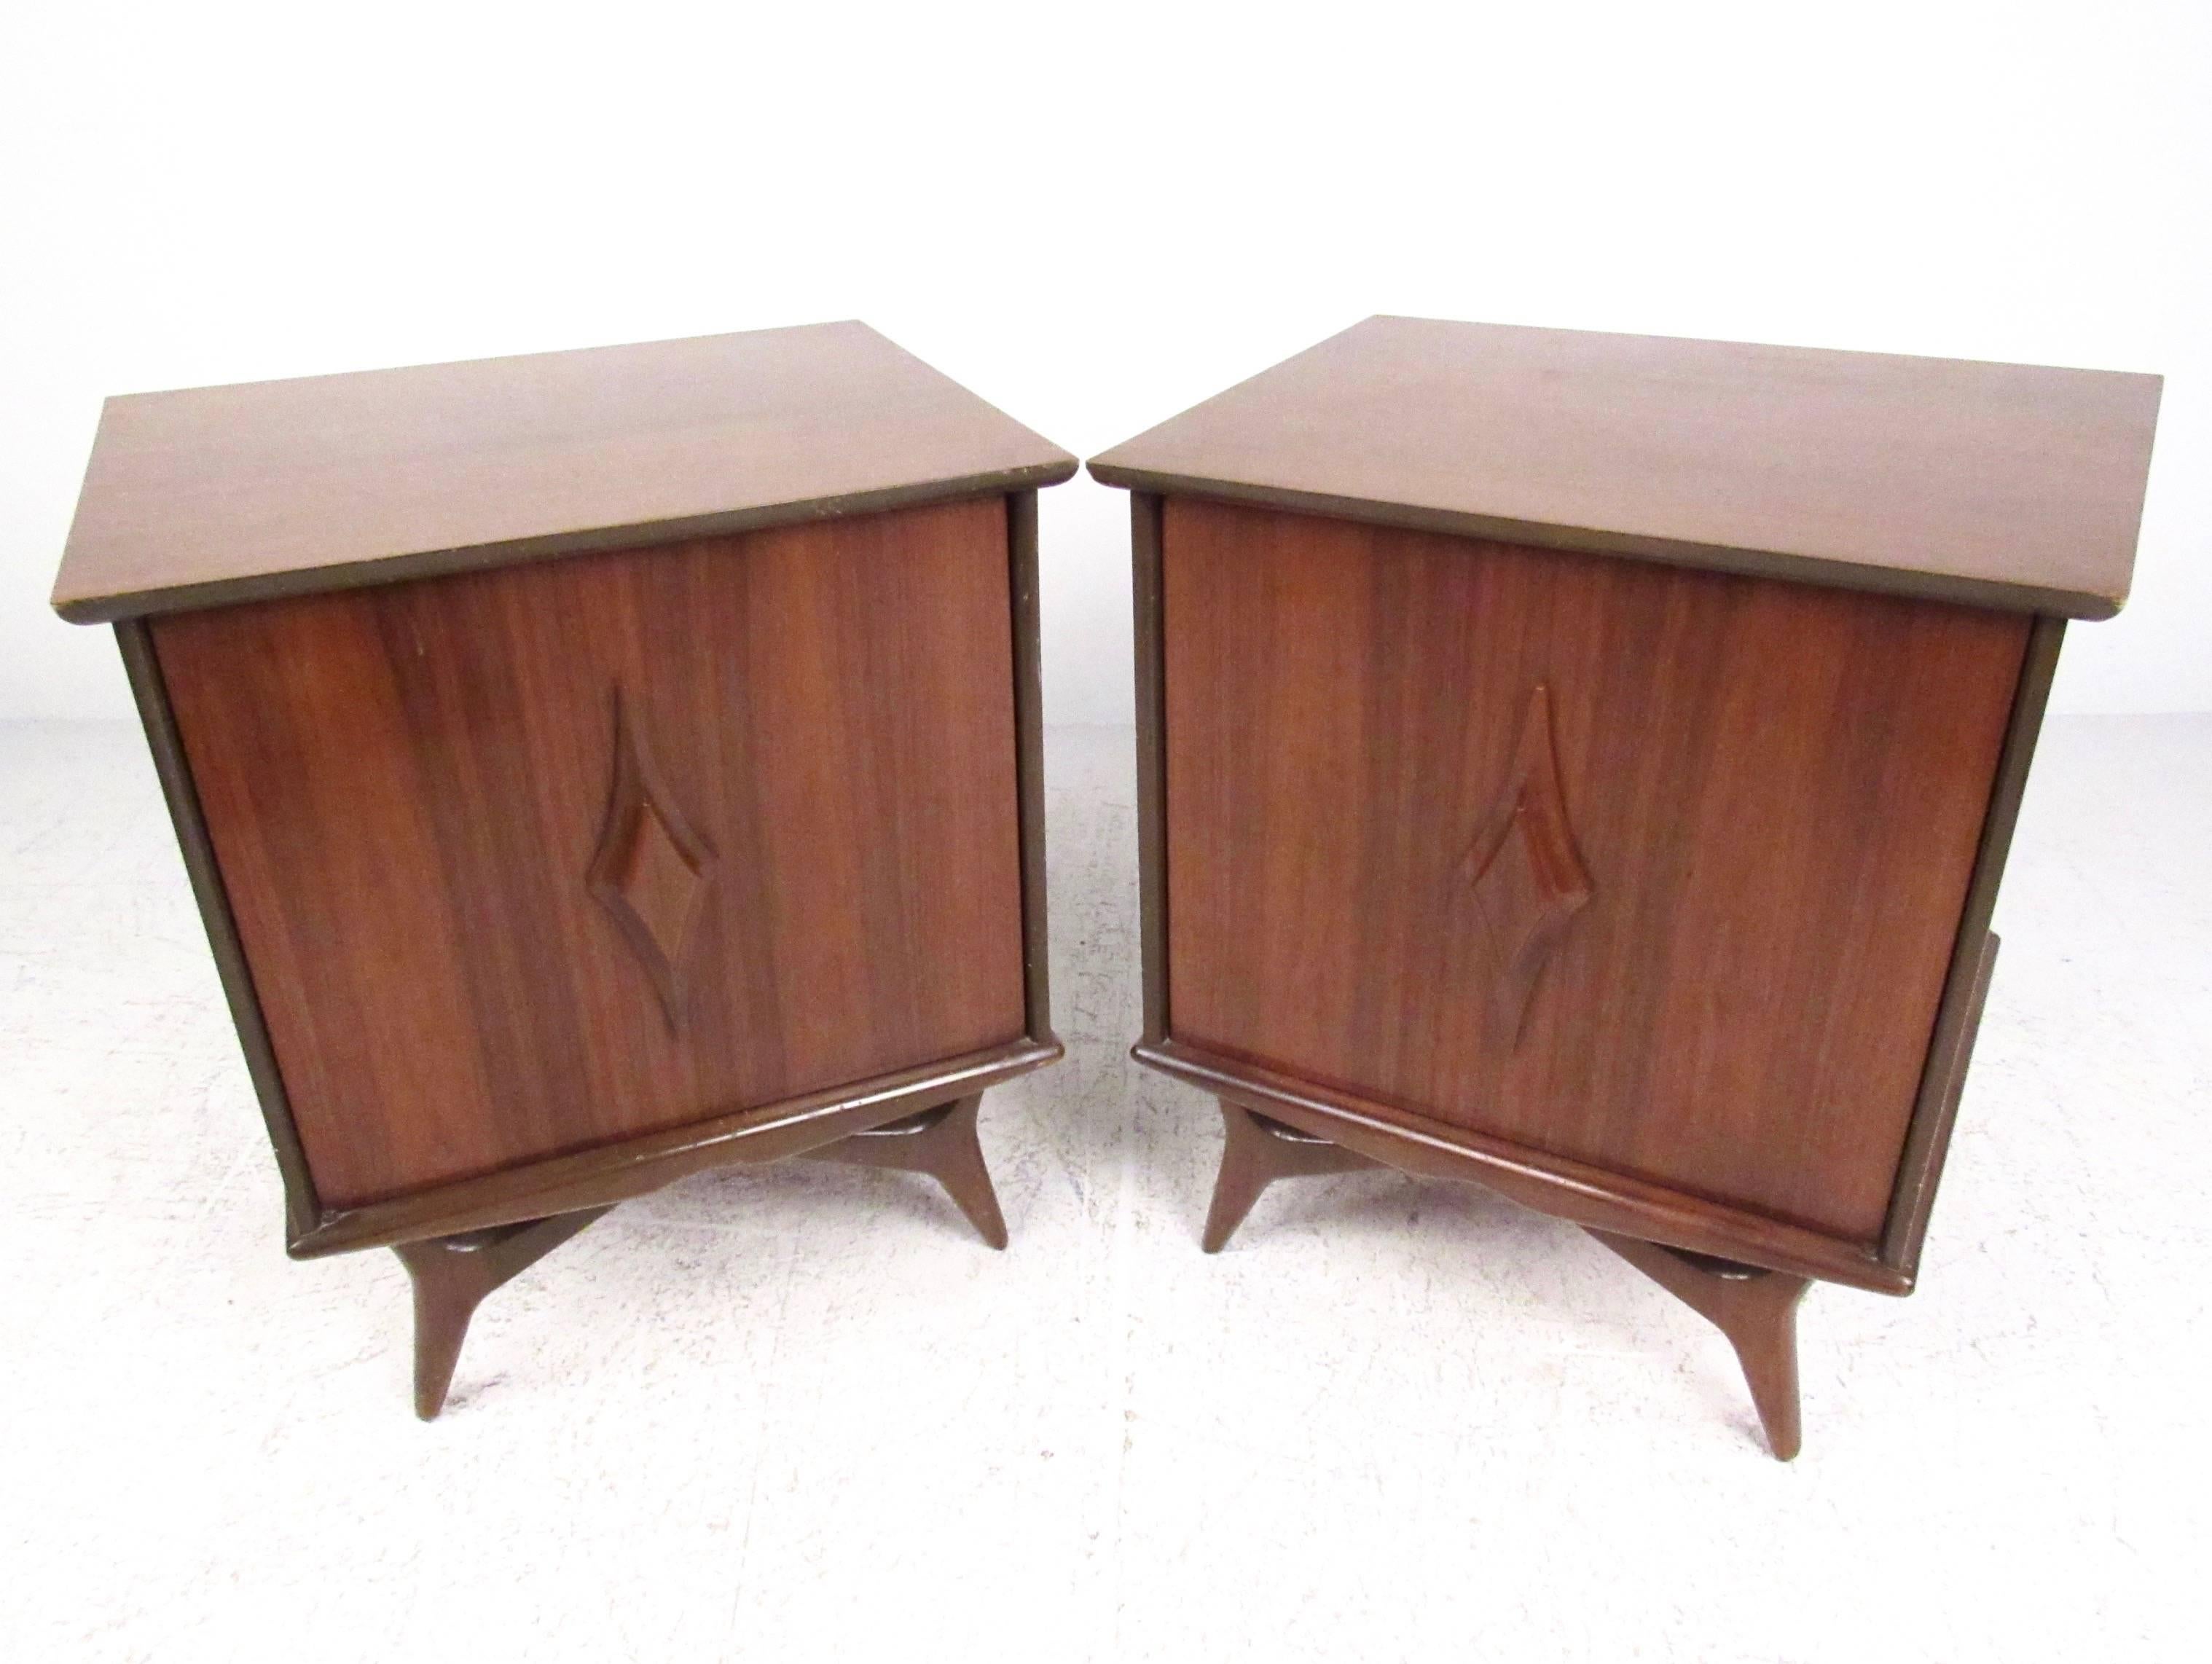 This stunning pair of vintage walnut nightstands features sculpted door fronts, tapered legs, and spacious interior cabinets. Adjustable shelves make this matching pair the perfect addition to bedroom or living room, allowing for stylish end table